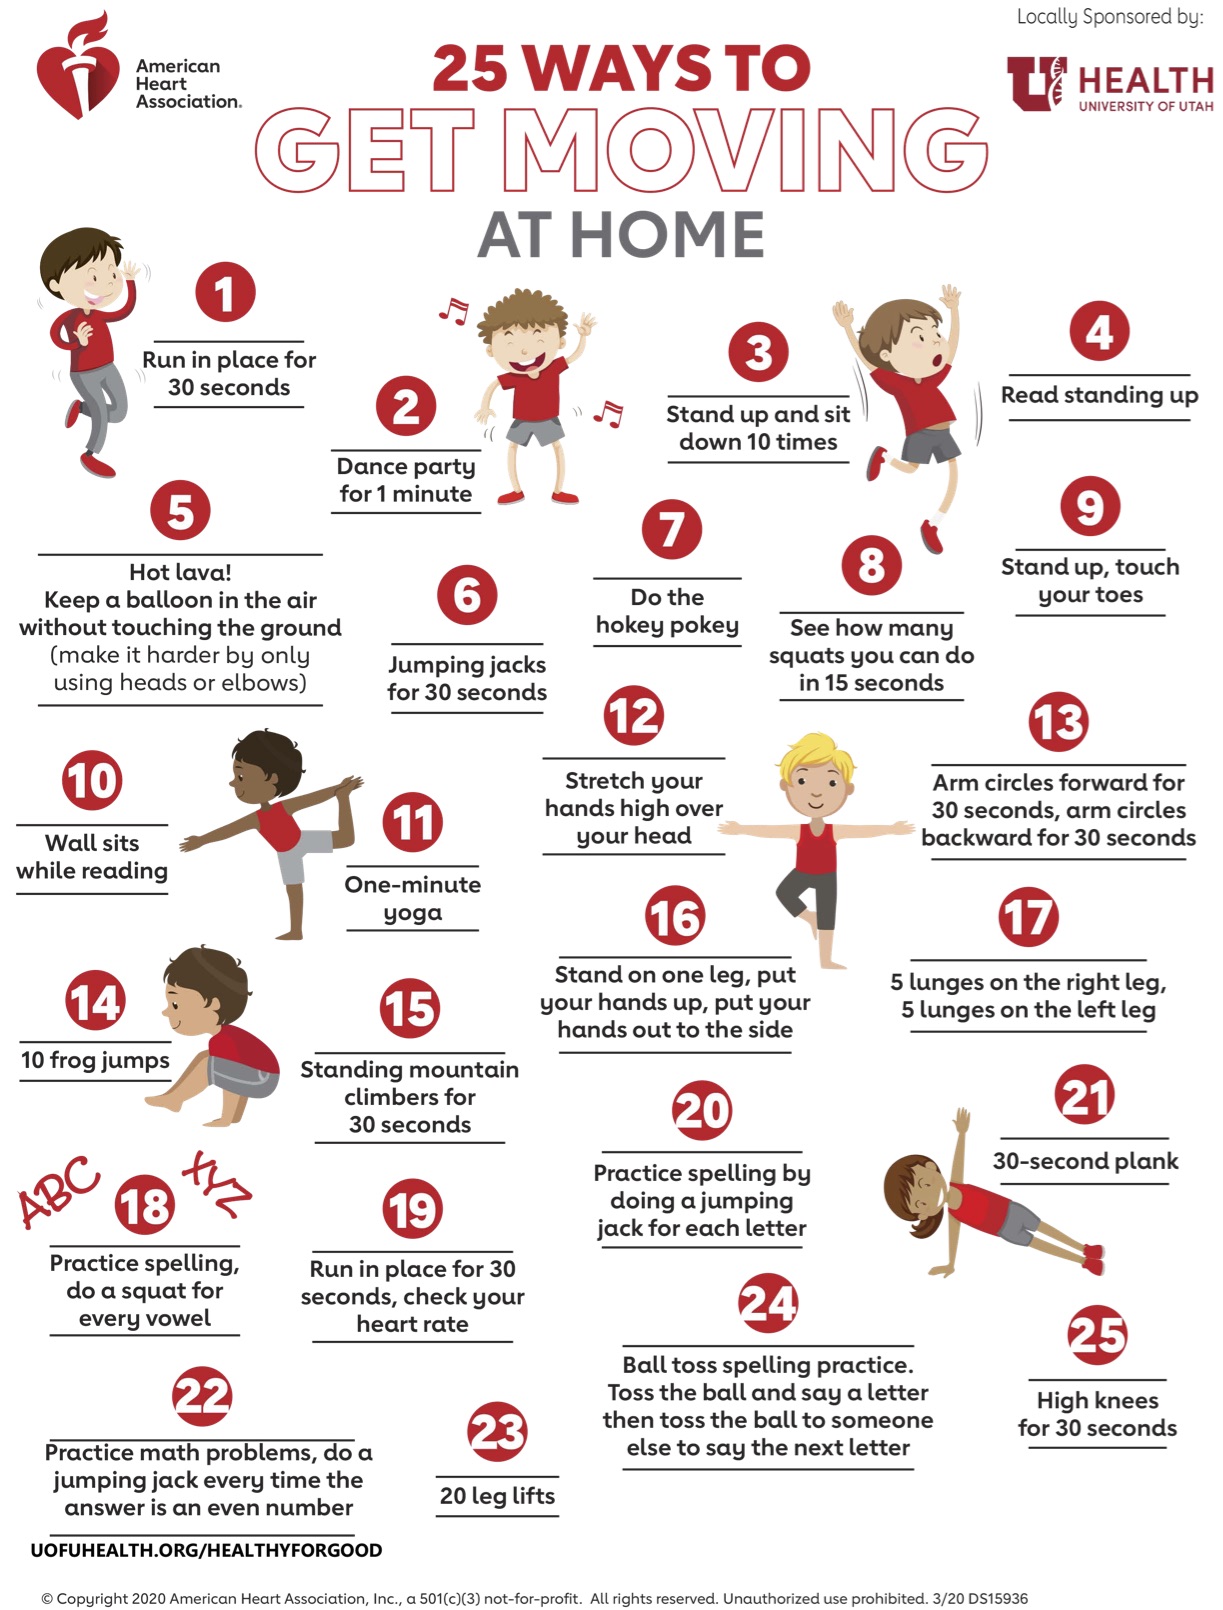 Twenty Five Ways to Get Moving at Home